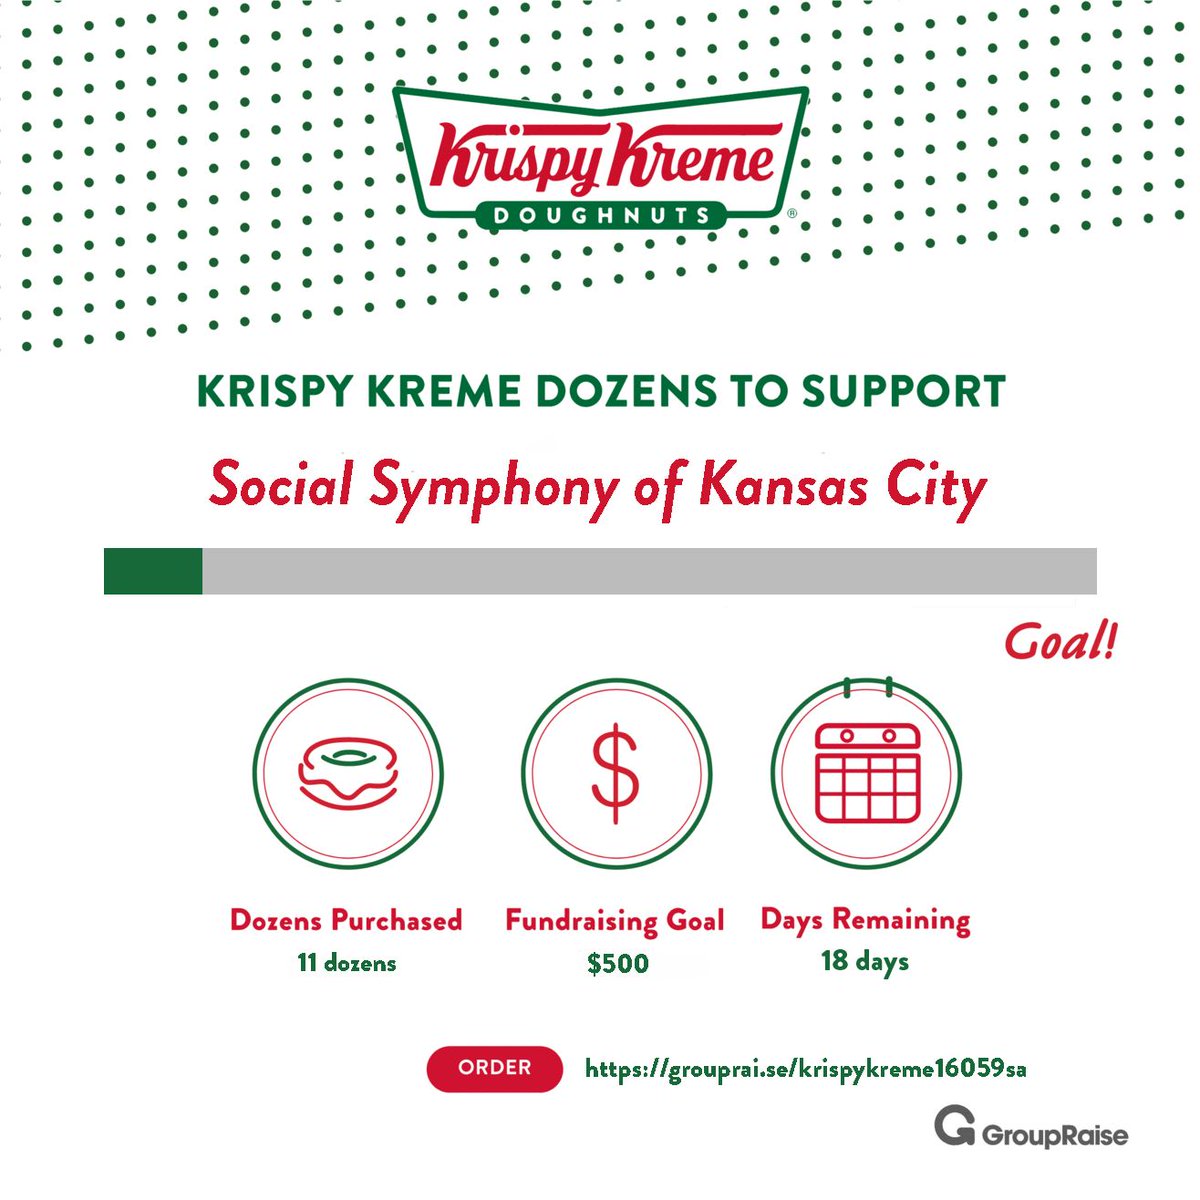 We need your help & all it involves is eating a few doughnuts 🍩🙌

With 18 days left of our Krispy Kreme fundraising campaign, we are at 16% of our goal. How can you help? Order doughnuts at $15.00 per dozen, and 50% of your order will be donated back to SSKC!